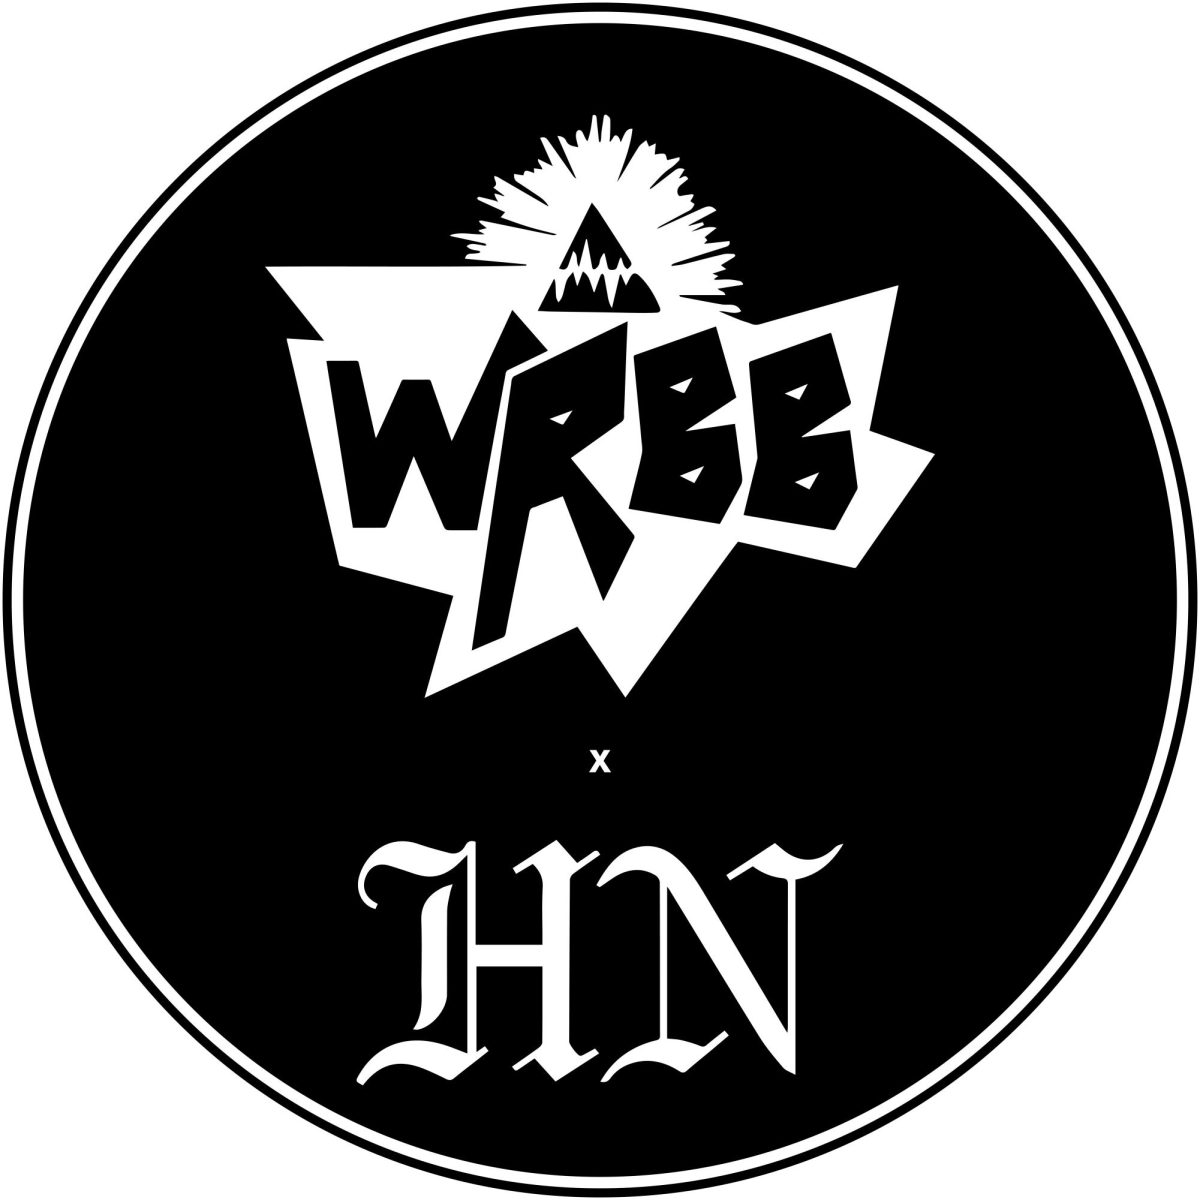 WRBB News Episode 3: Rogue Rodents and the Mills Merger